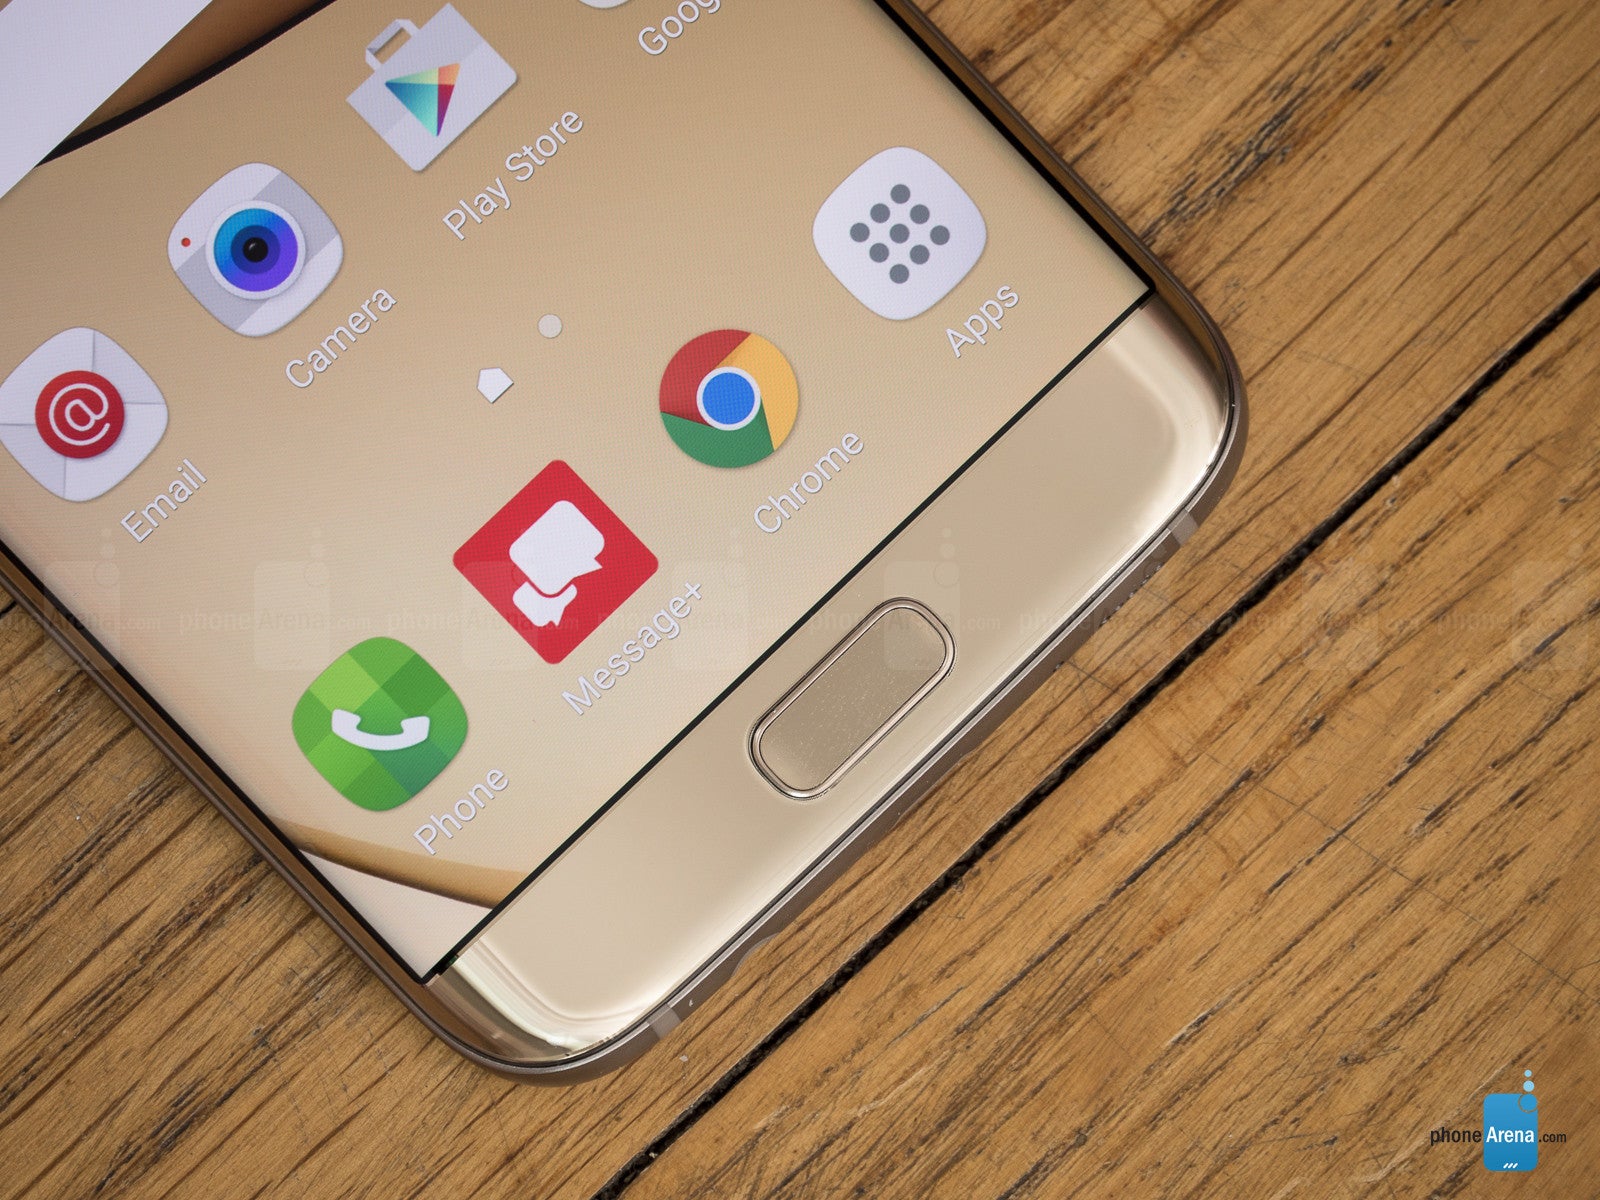 Samsung Galaxy S7 demand on the rise as many Note 7 owners choose to get one instead